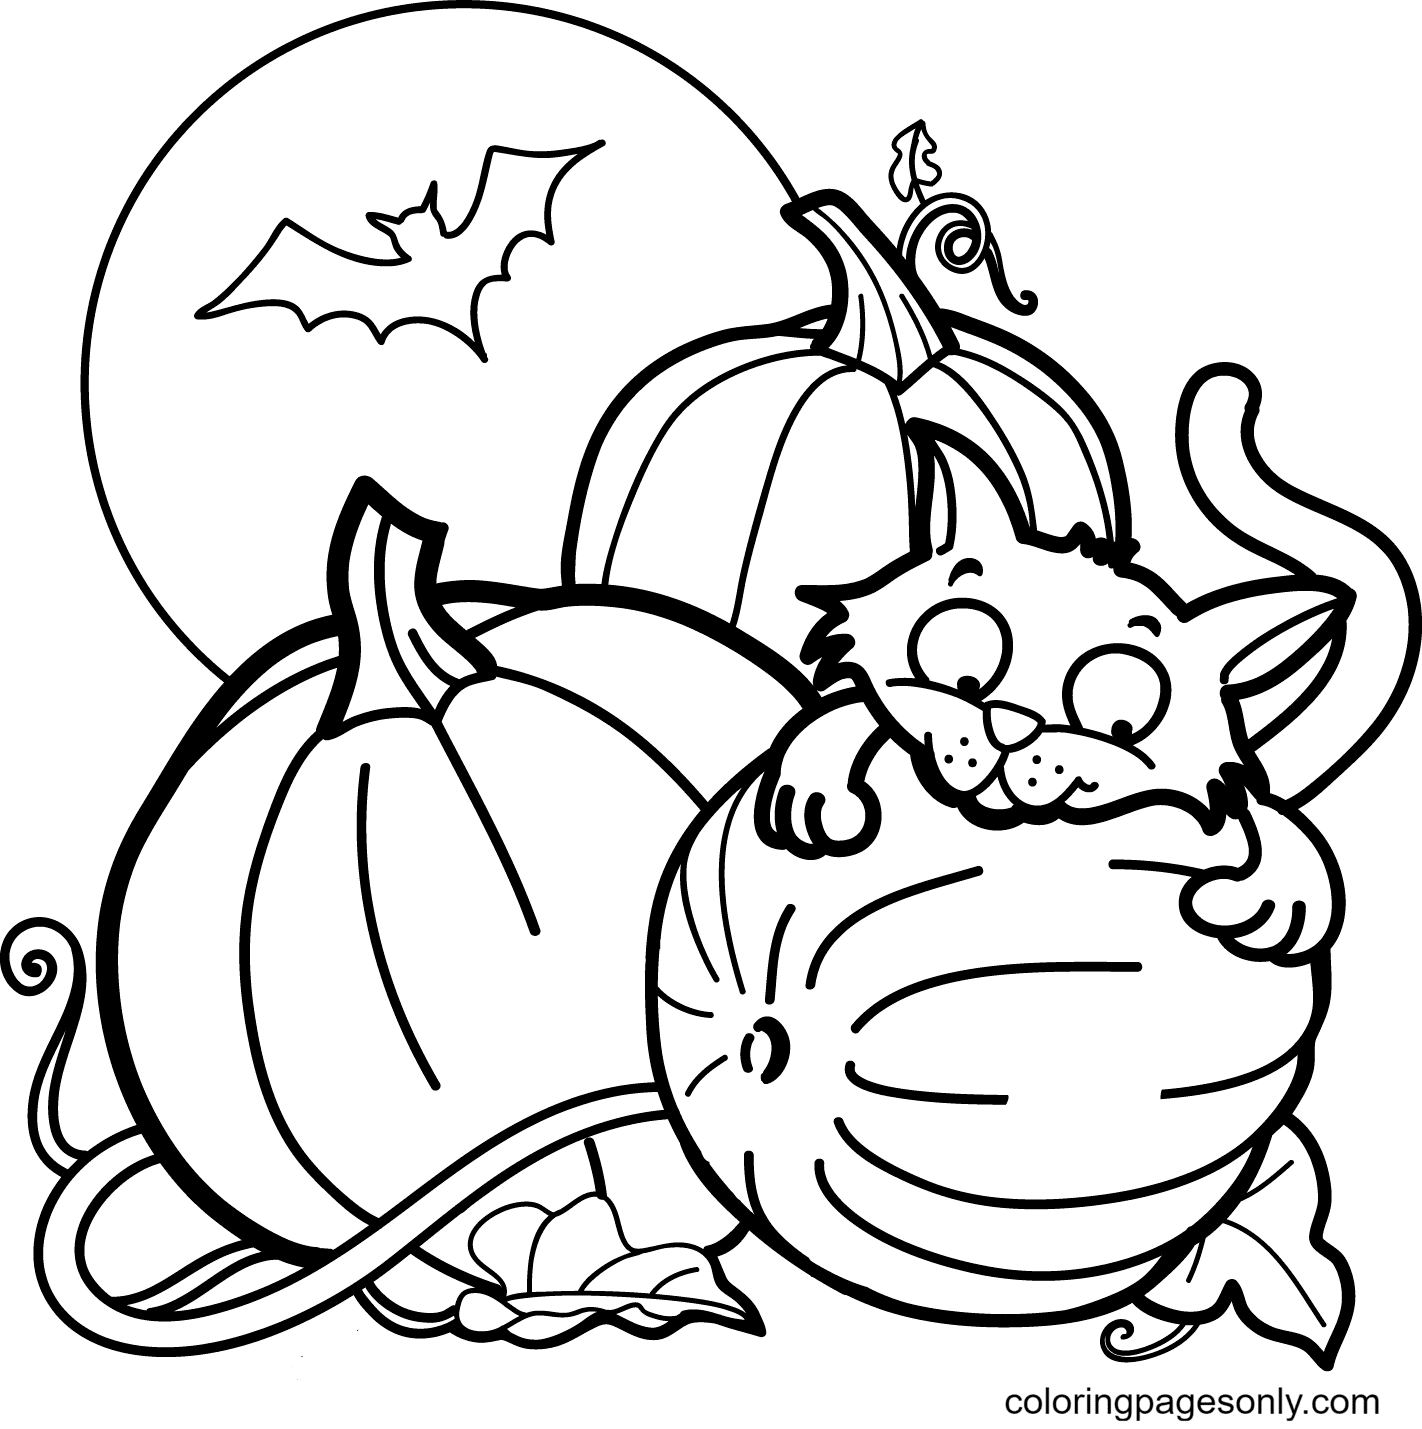 Halloween cats coloring pages printable for free download